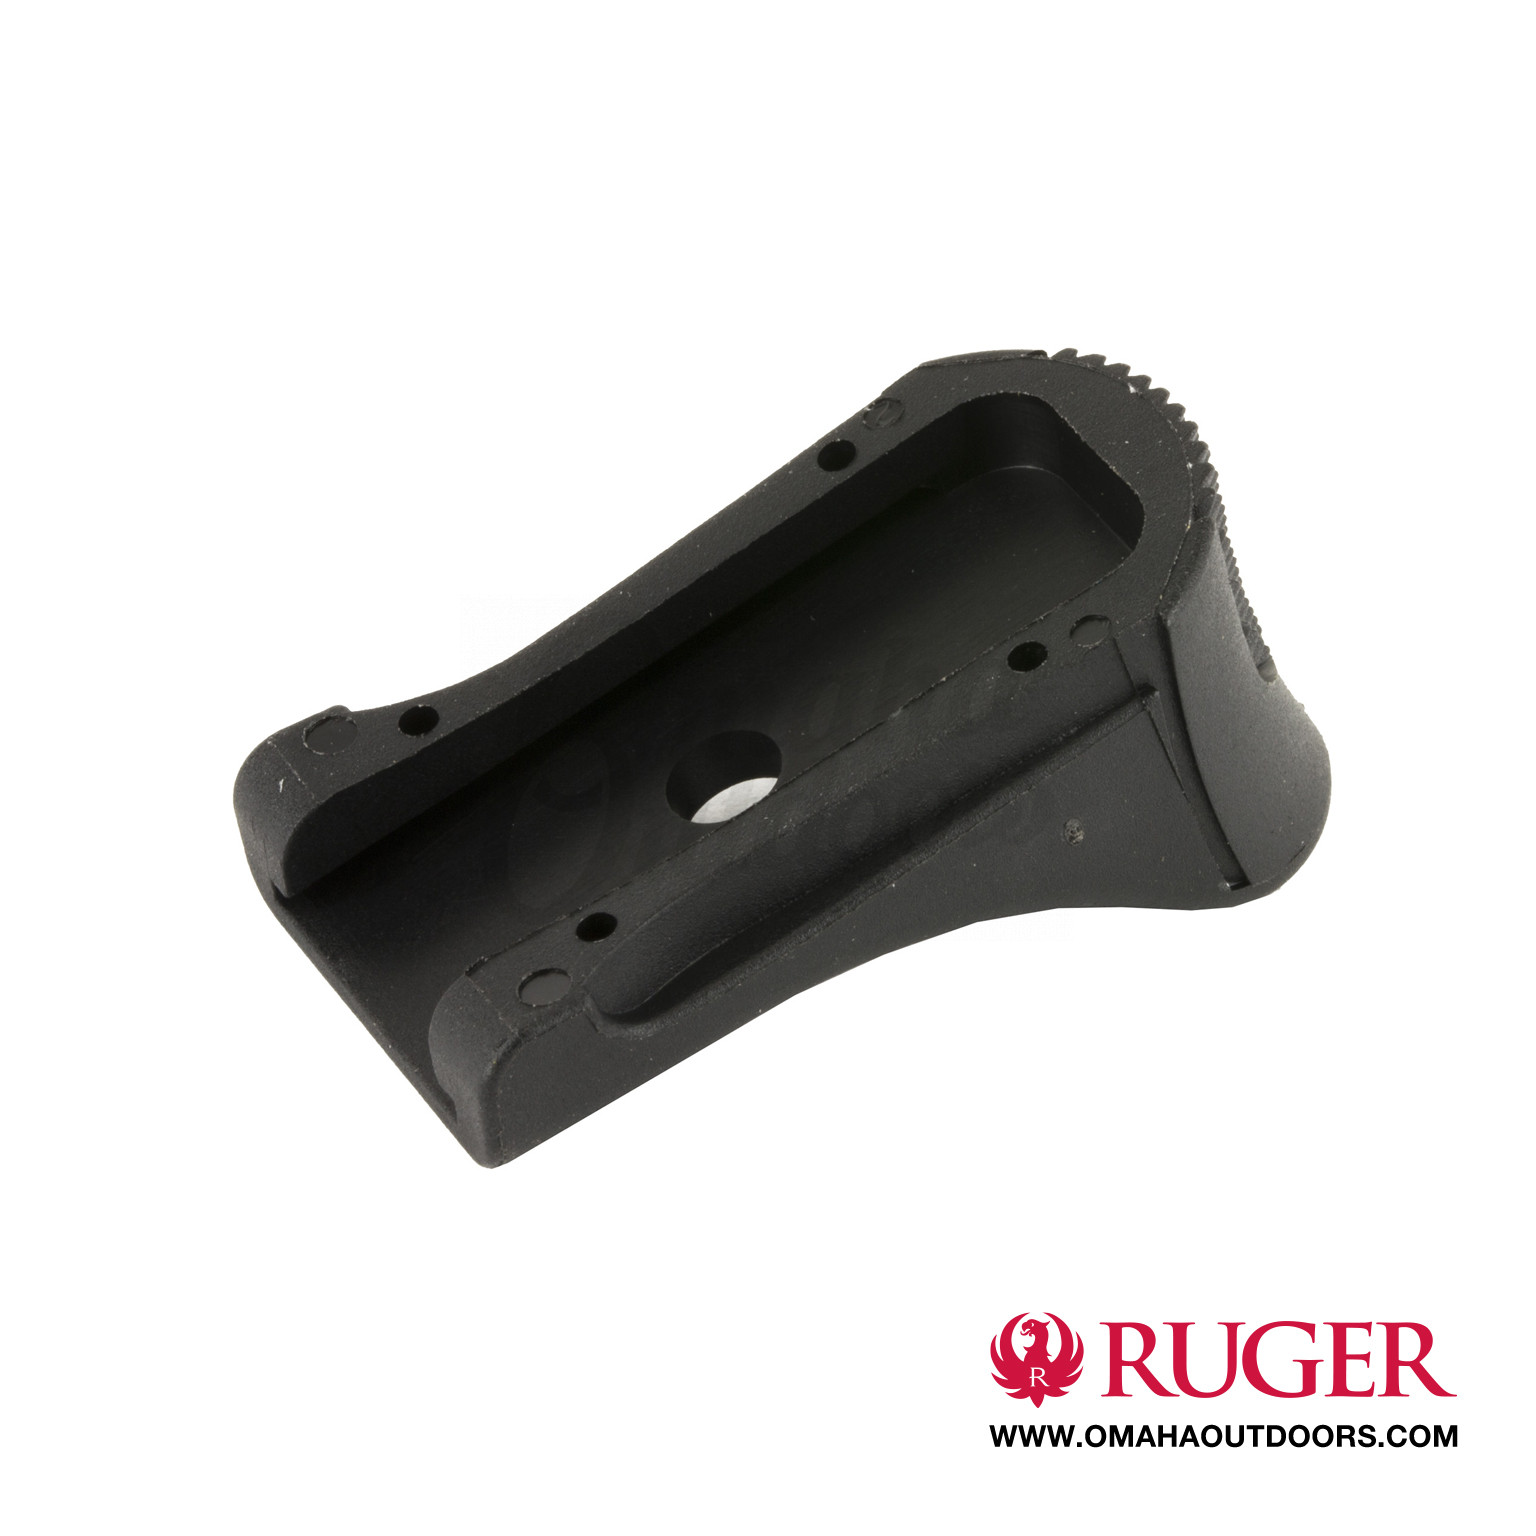 Ruger Lc9 Extended Floor Plate Omaha Outdoors